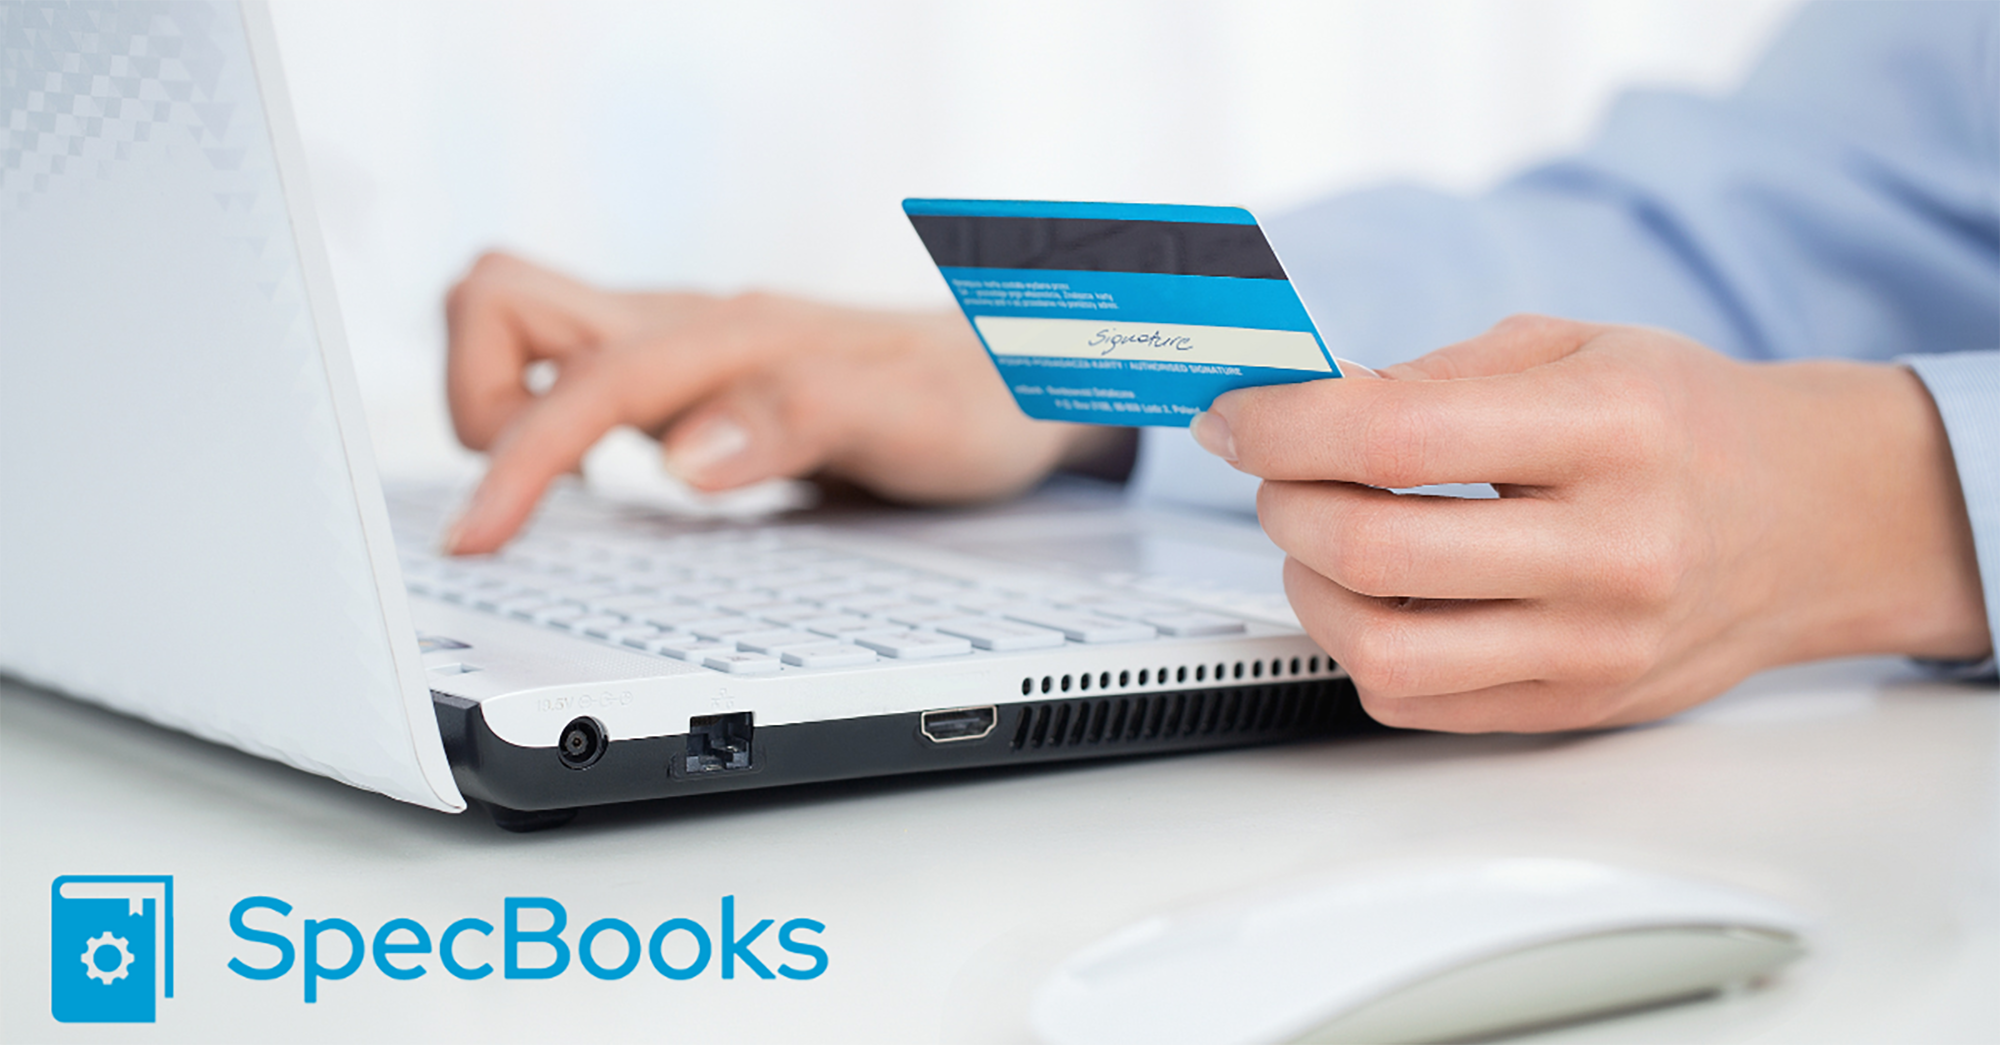 A person in a blue shirt holds their credit card as they type on a white laptop. The SpecBooks logo is in the corner.